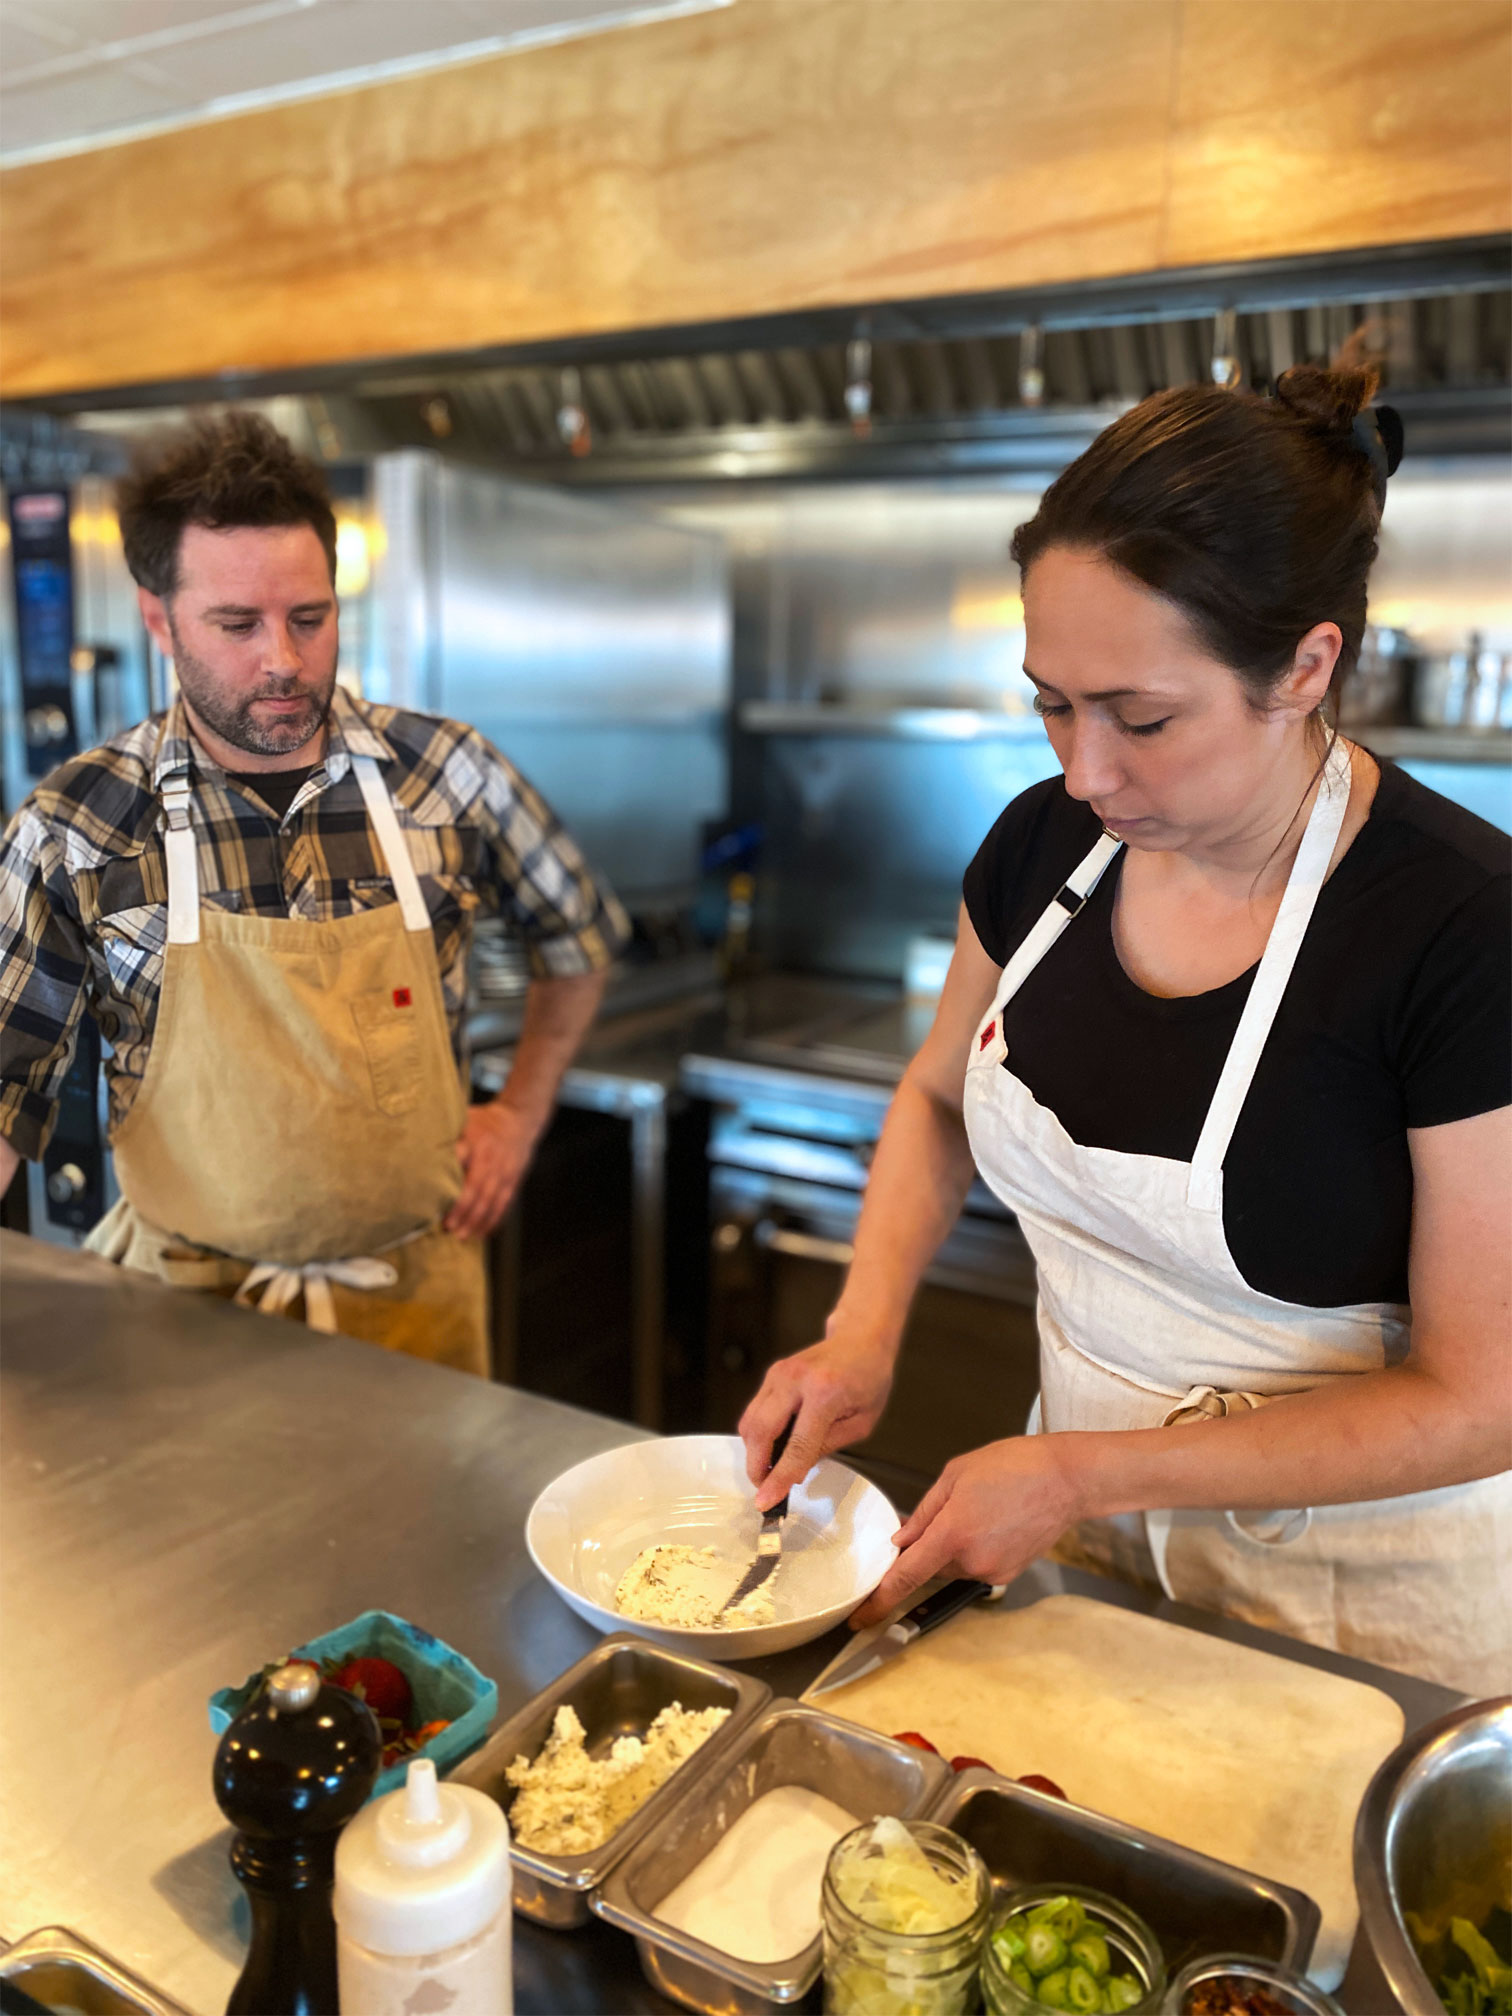 Chef Sarah Heard spreads butter onto a white plate while Chef Nathan Lemley watches.